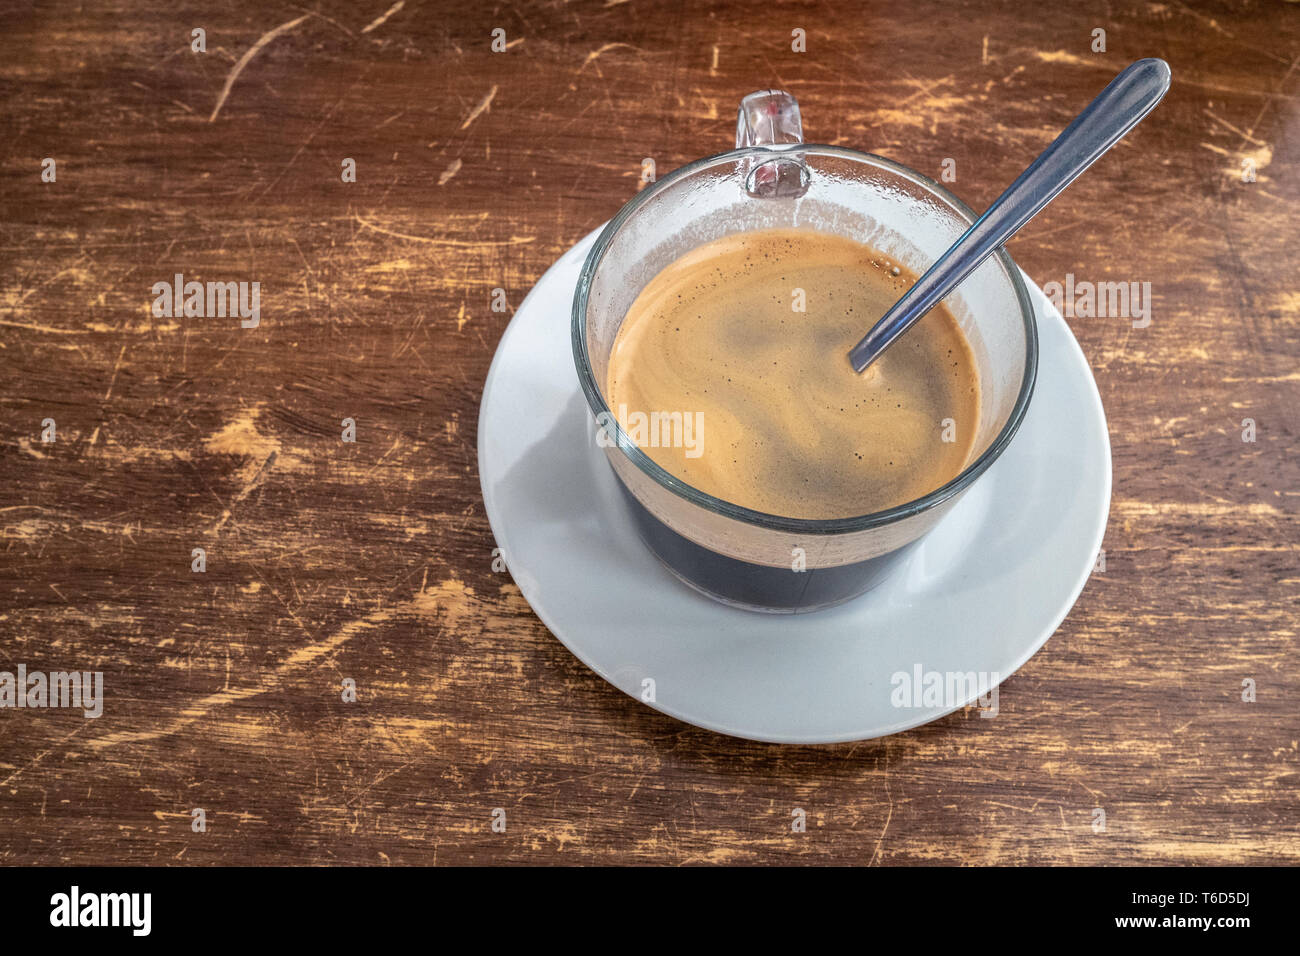 Cafe Cubano in in a glass mug on a wooden table Stock Photo